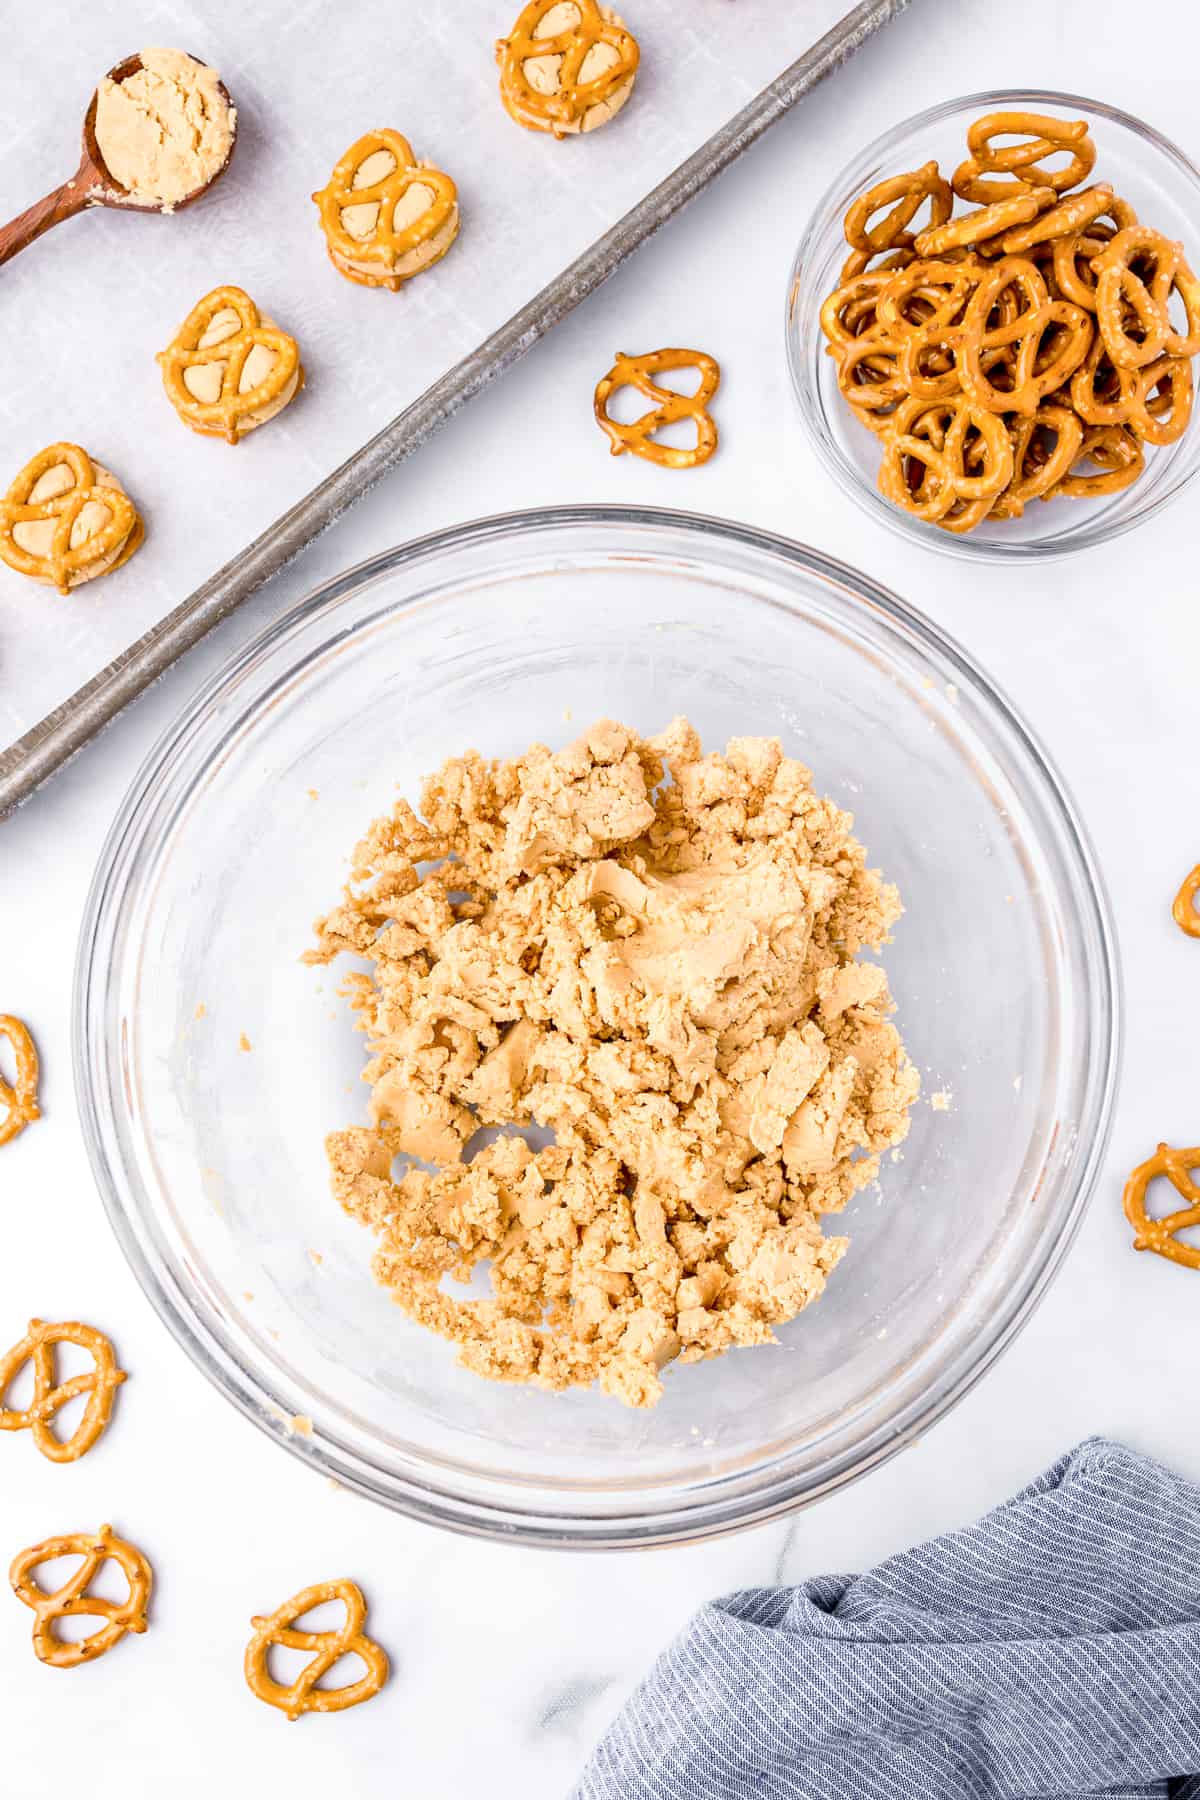 Peanut butter pretzel bites dough in a large bowl from overhead with pretzels and some prepared pretzel bites on a cookie sheet nearby.